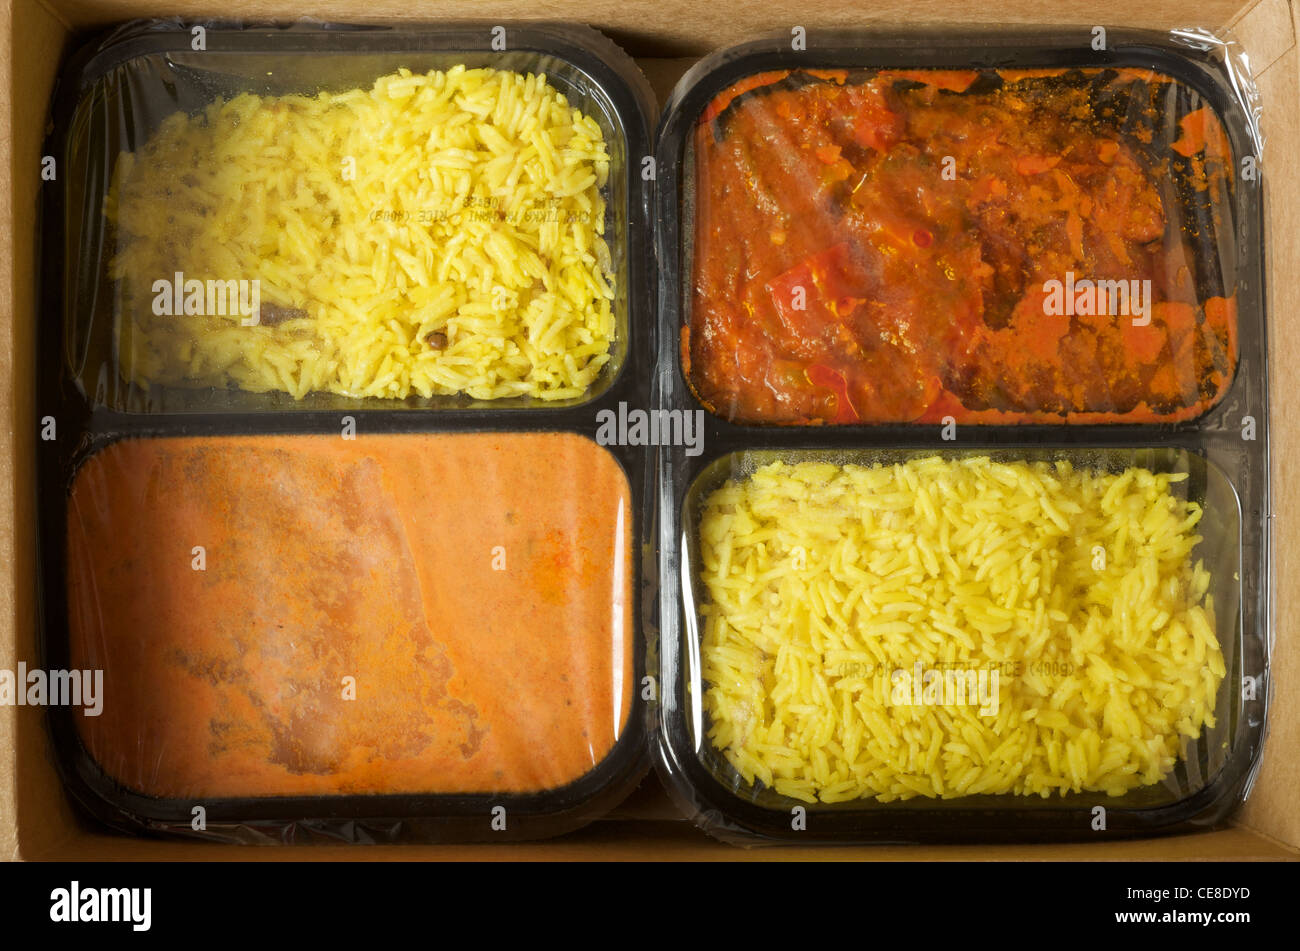 Waitrose Indian takeaway for two meal Stock Photo